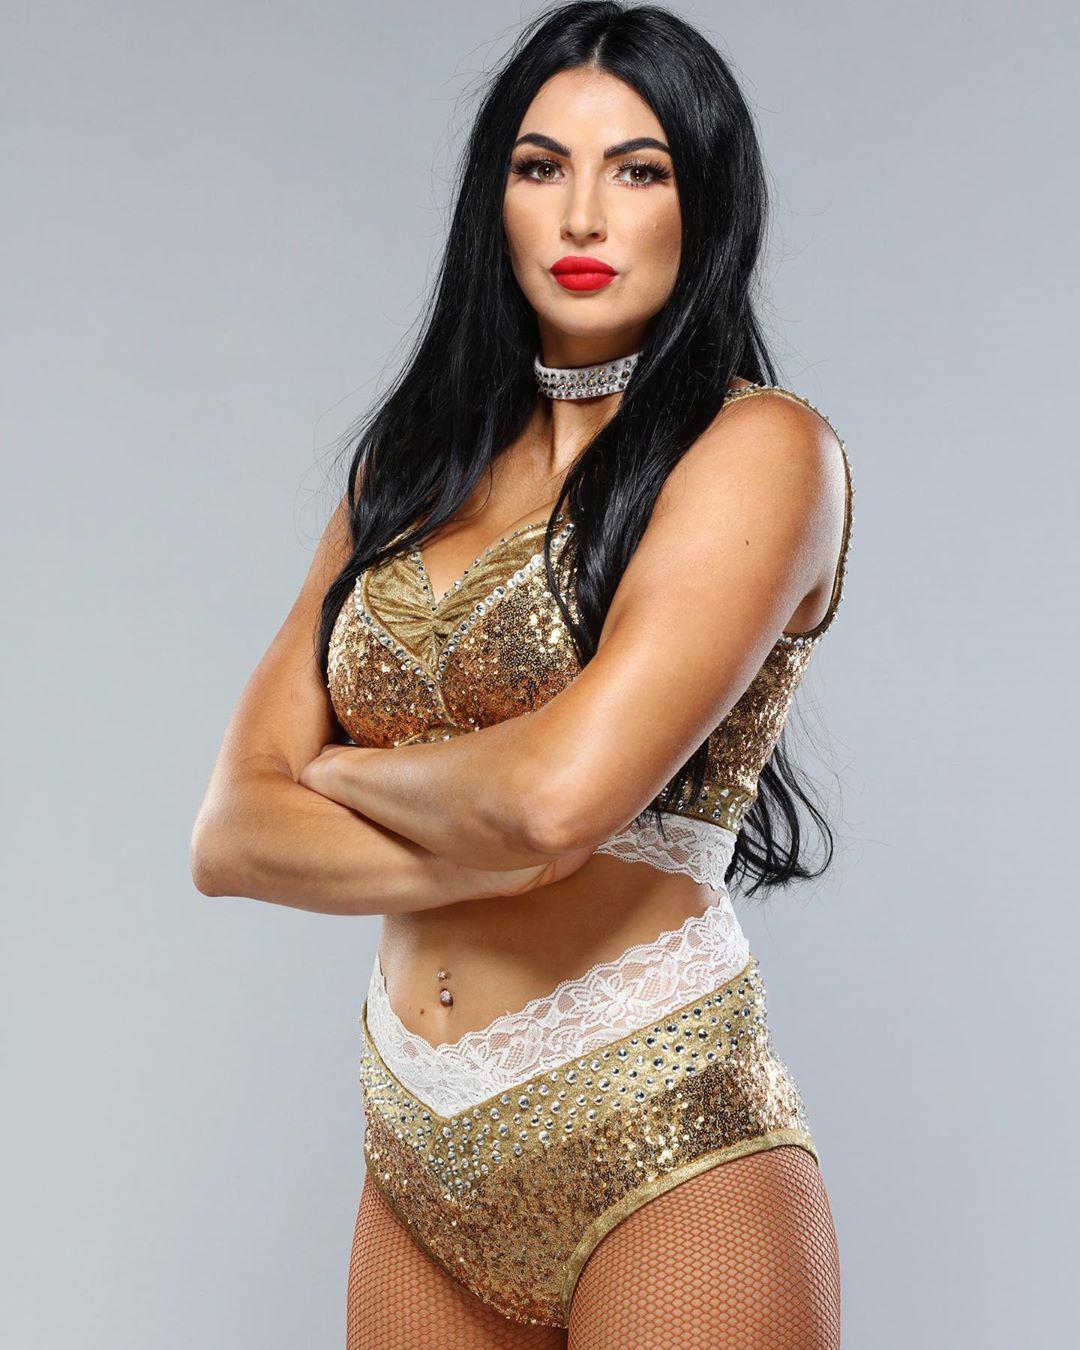 60+ Hot Pictures Of Billie Kay Will Rock The WWE Fan Inside You 2